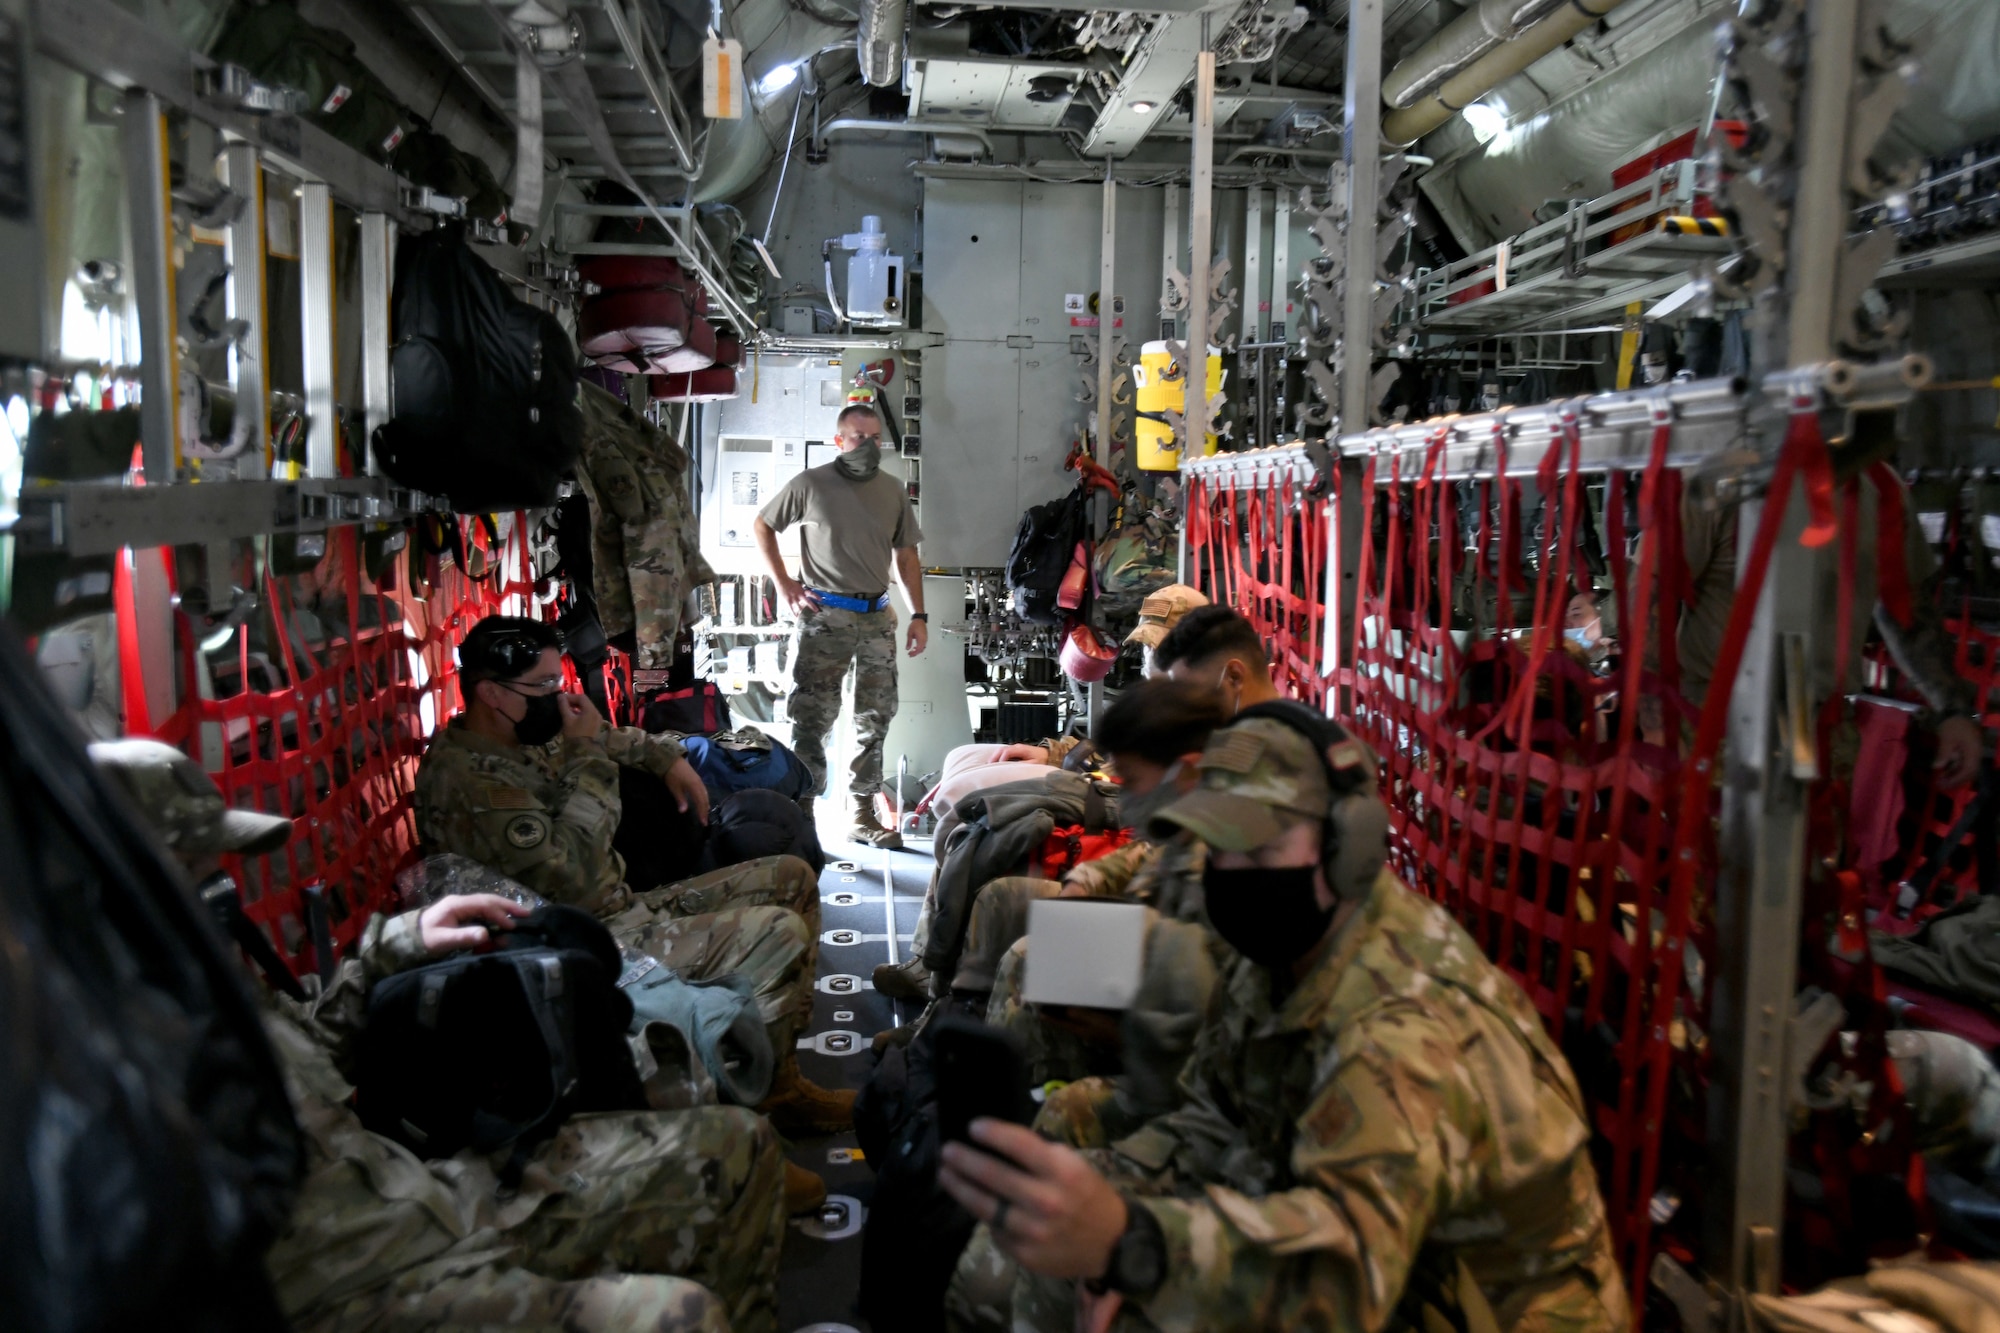 433rd Civil Engineer Squadron firefighters get settled aboard a C-130H Hercules cargo aircraft June 28, 2020 at Joint Base San Antonio-Lackland, Texas.